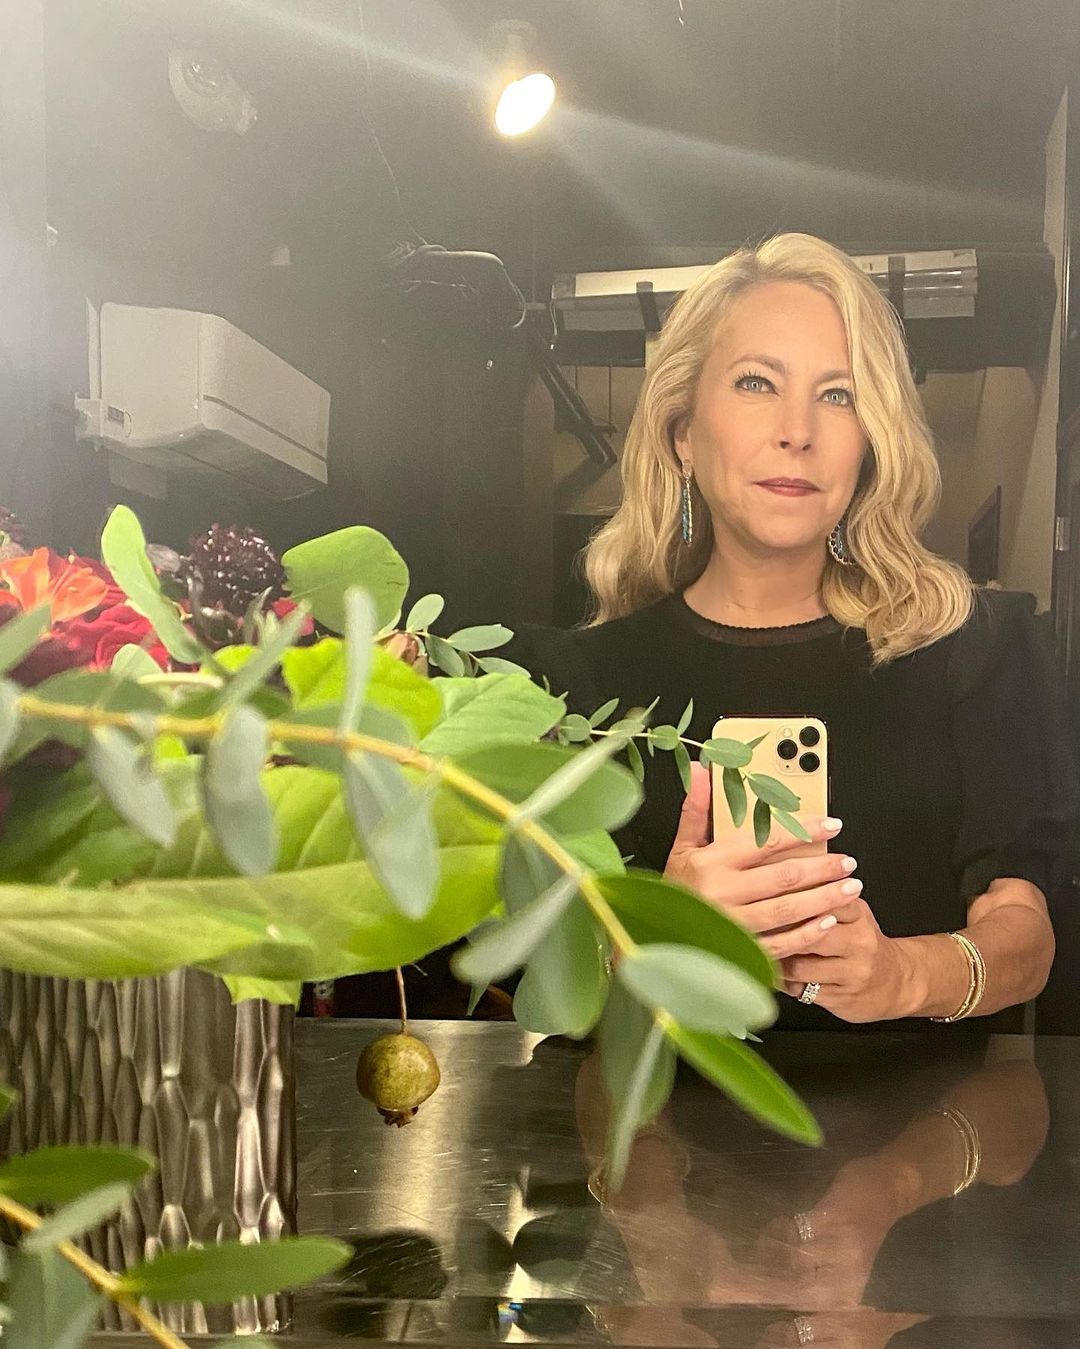 Sutton Stracke takes a mirror selfie before appearing on Jimmy Kimmel Live. 